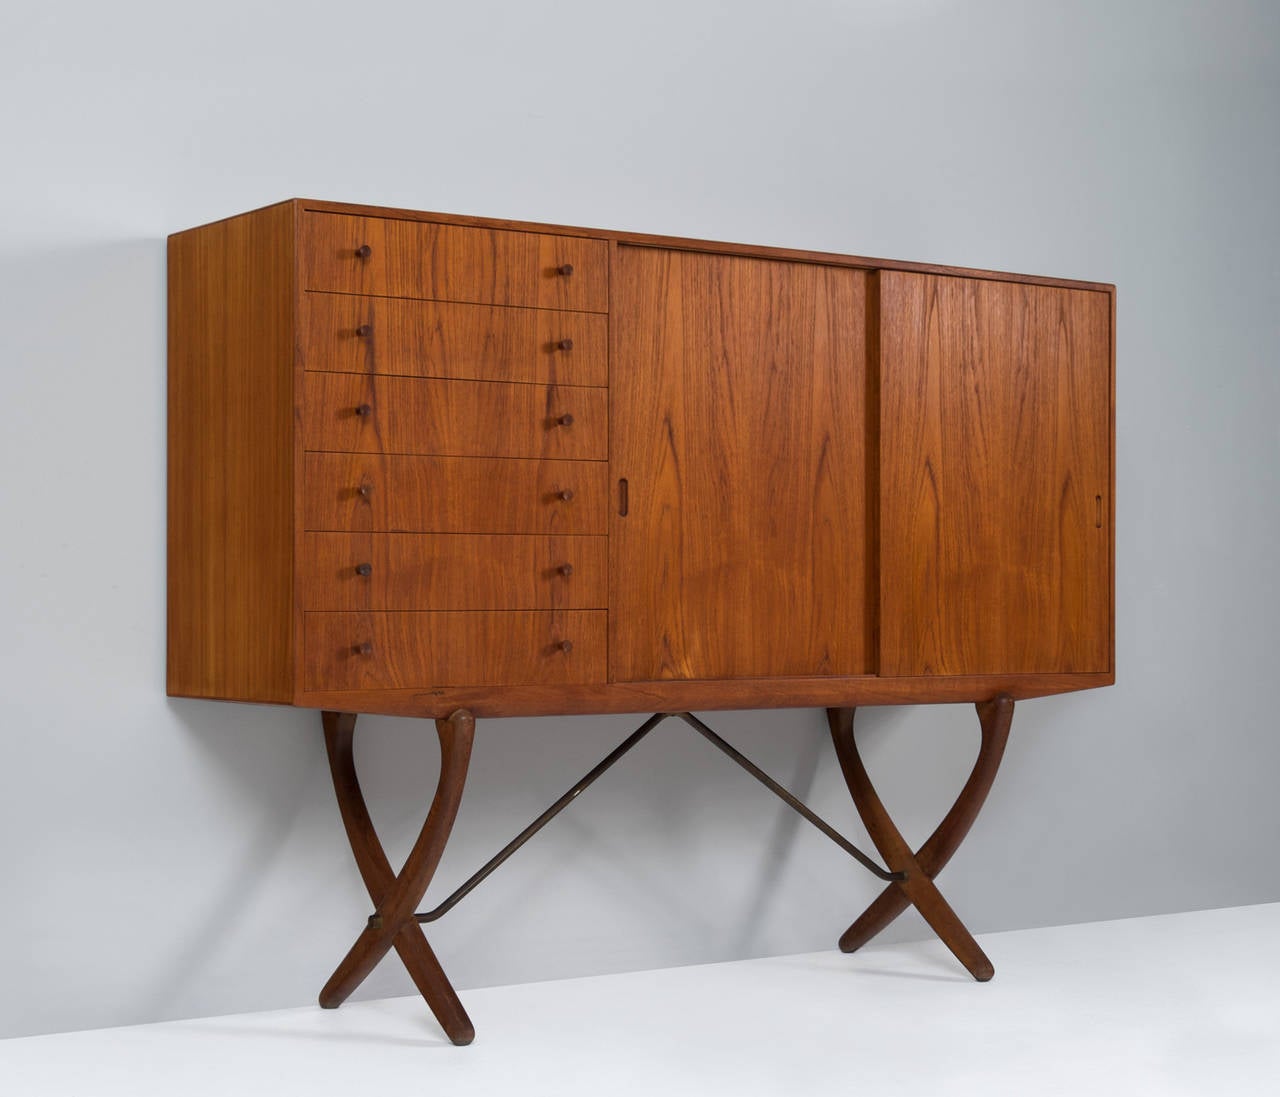 Sideboard, in teak, oak and brass, by Hans J. Wegner for Carl Hansen, Denmark, 1950s.
 
Rare teak and oak highboard with X-leg base by Hans Wegner. The outside is veneered with teak veneer with a hardwax finish, based on the original expression, the